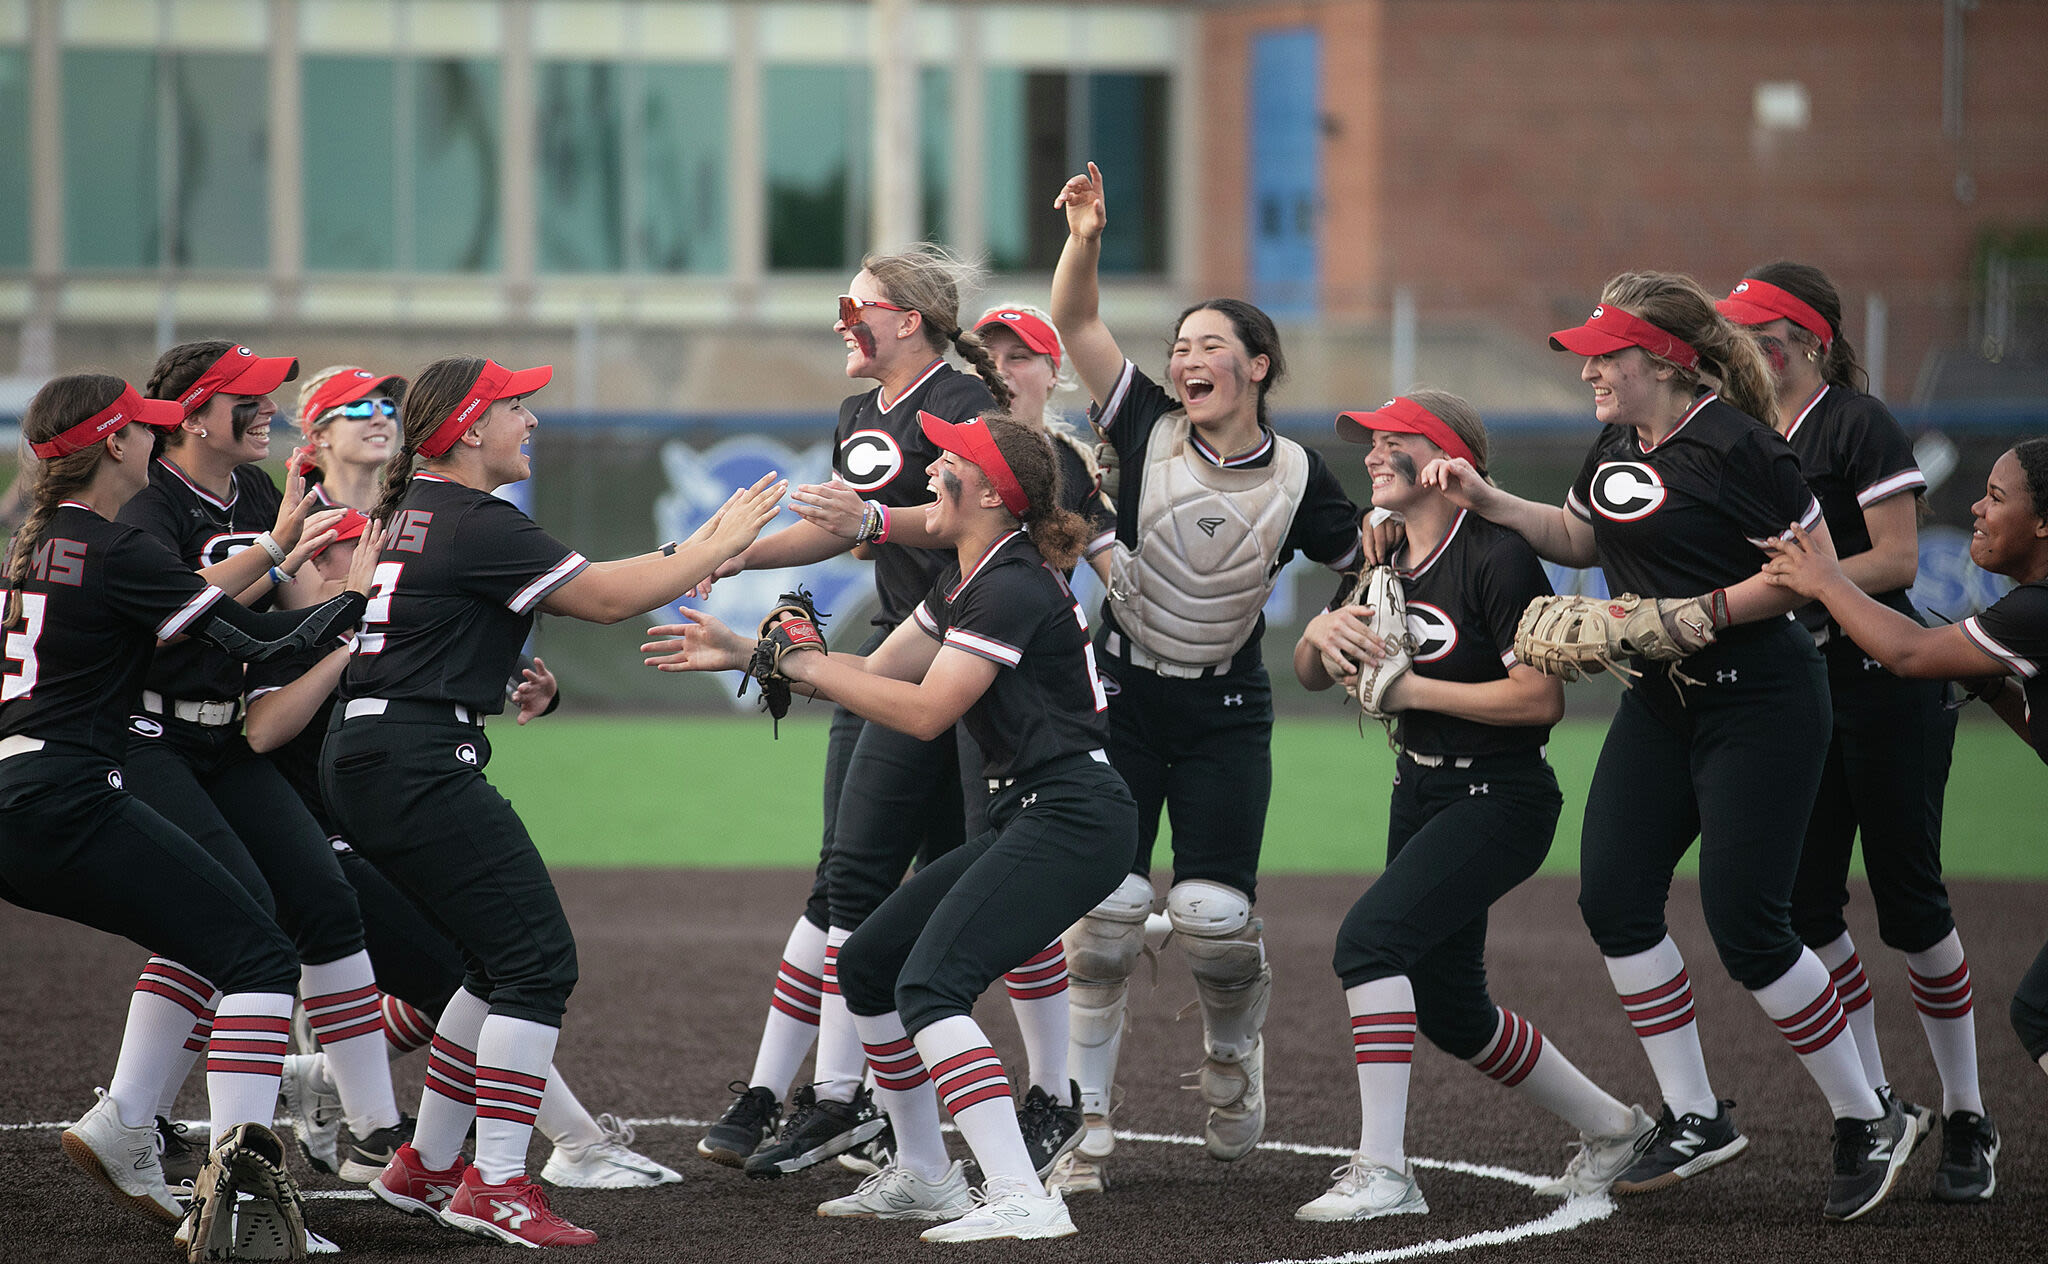 Cheshire softball claims second SCC tournament title in four seasons with win over North Haven